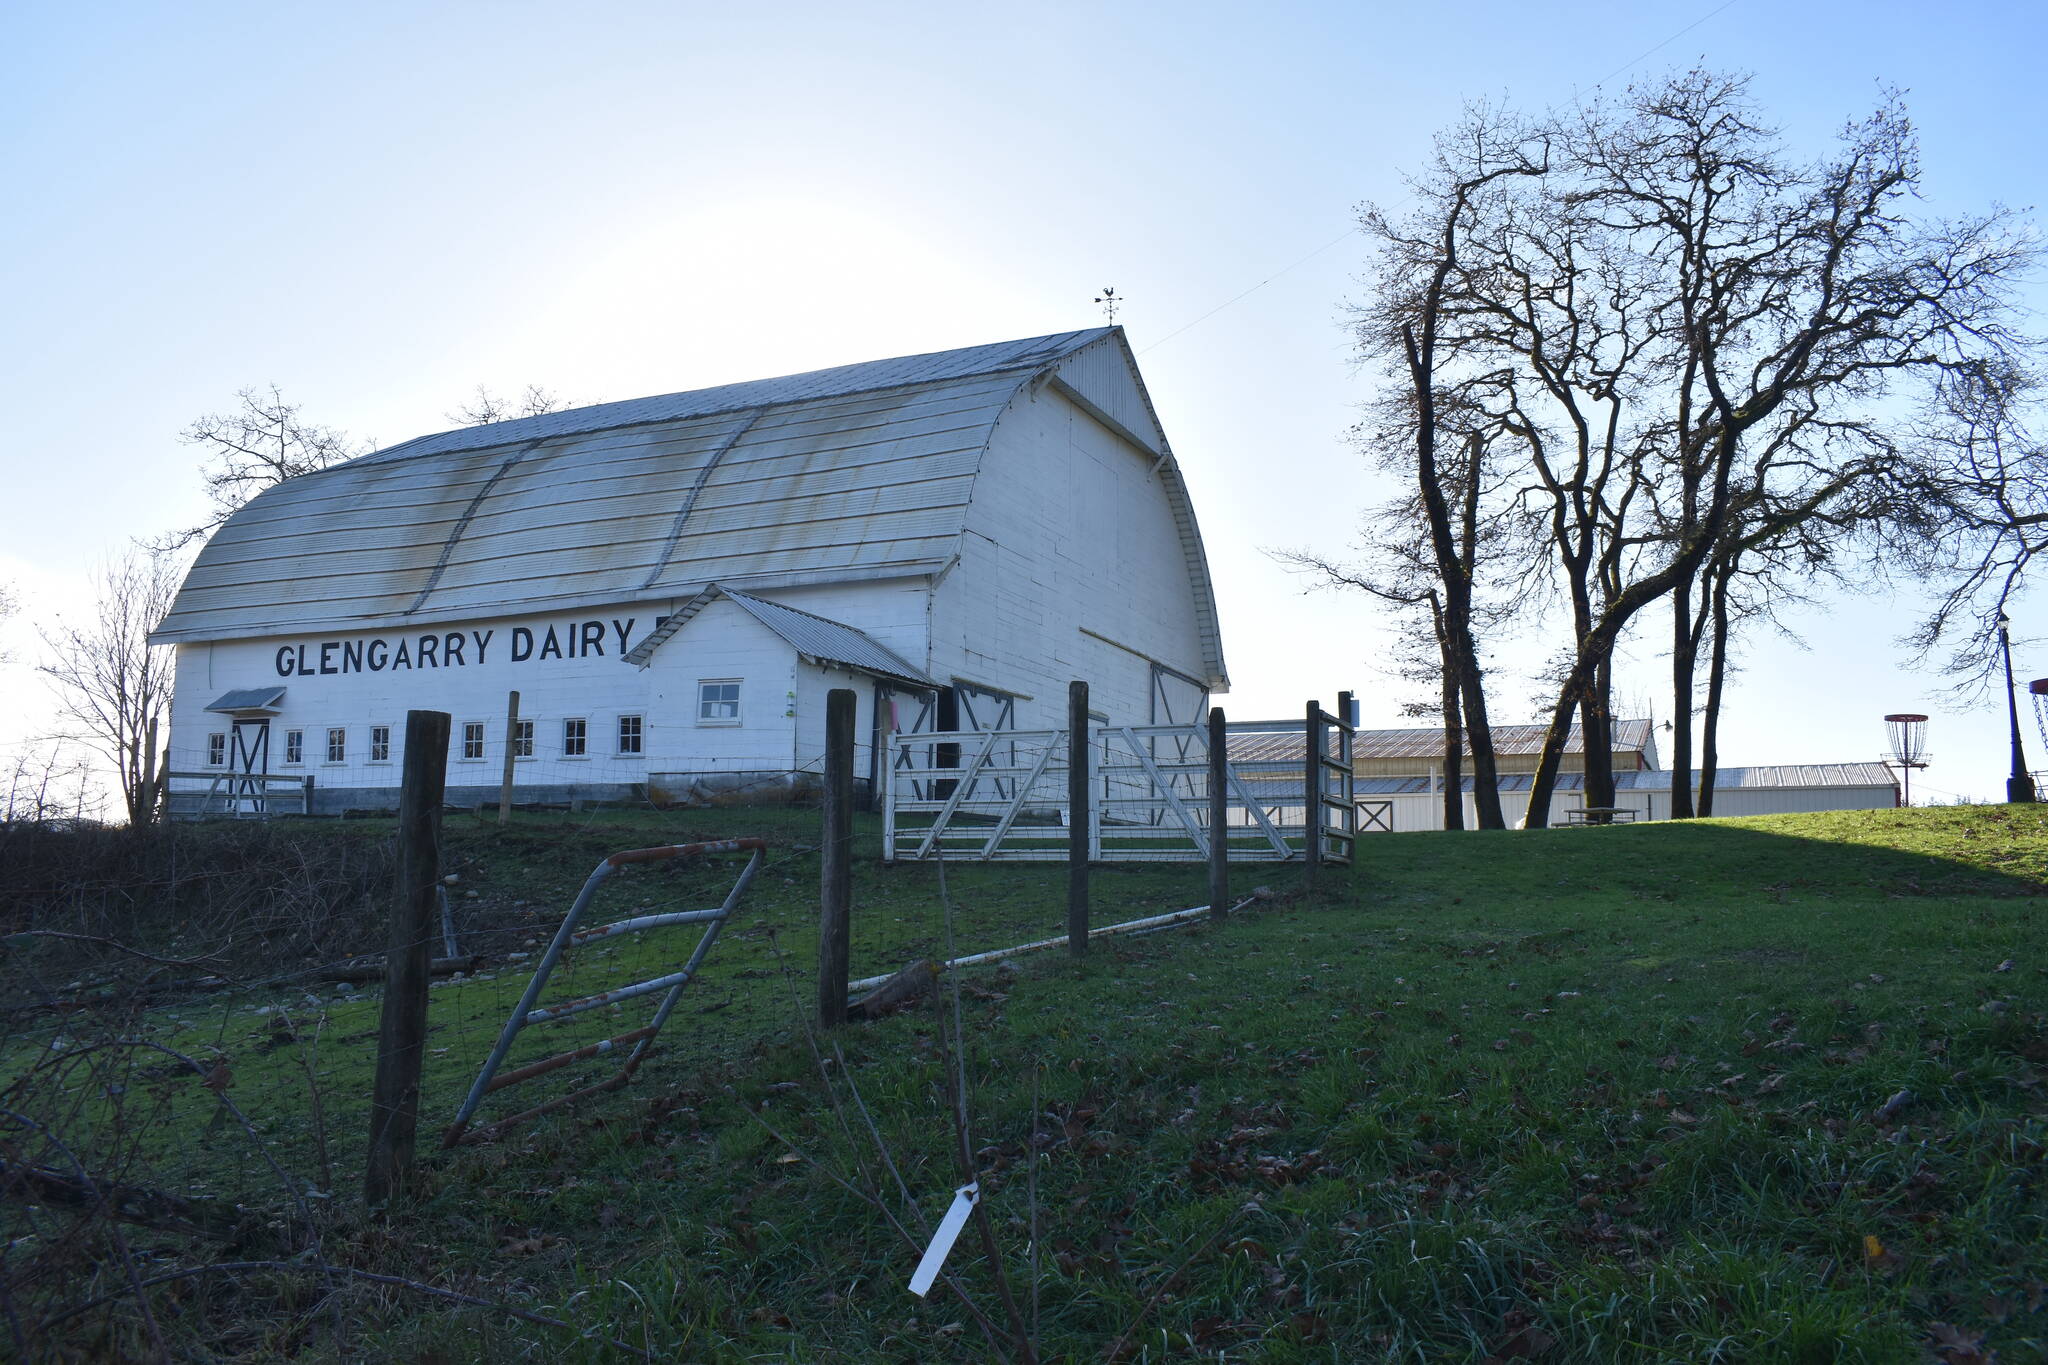 Matthew N. Wells / The Daily World
Glengarry Dairy Farm is the tallest building on the property of Snowbird Farm and Cidery. The 106-year-old barn, which is on the Washington State Historic Barn Registry, has since been restored.